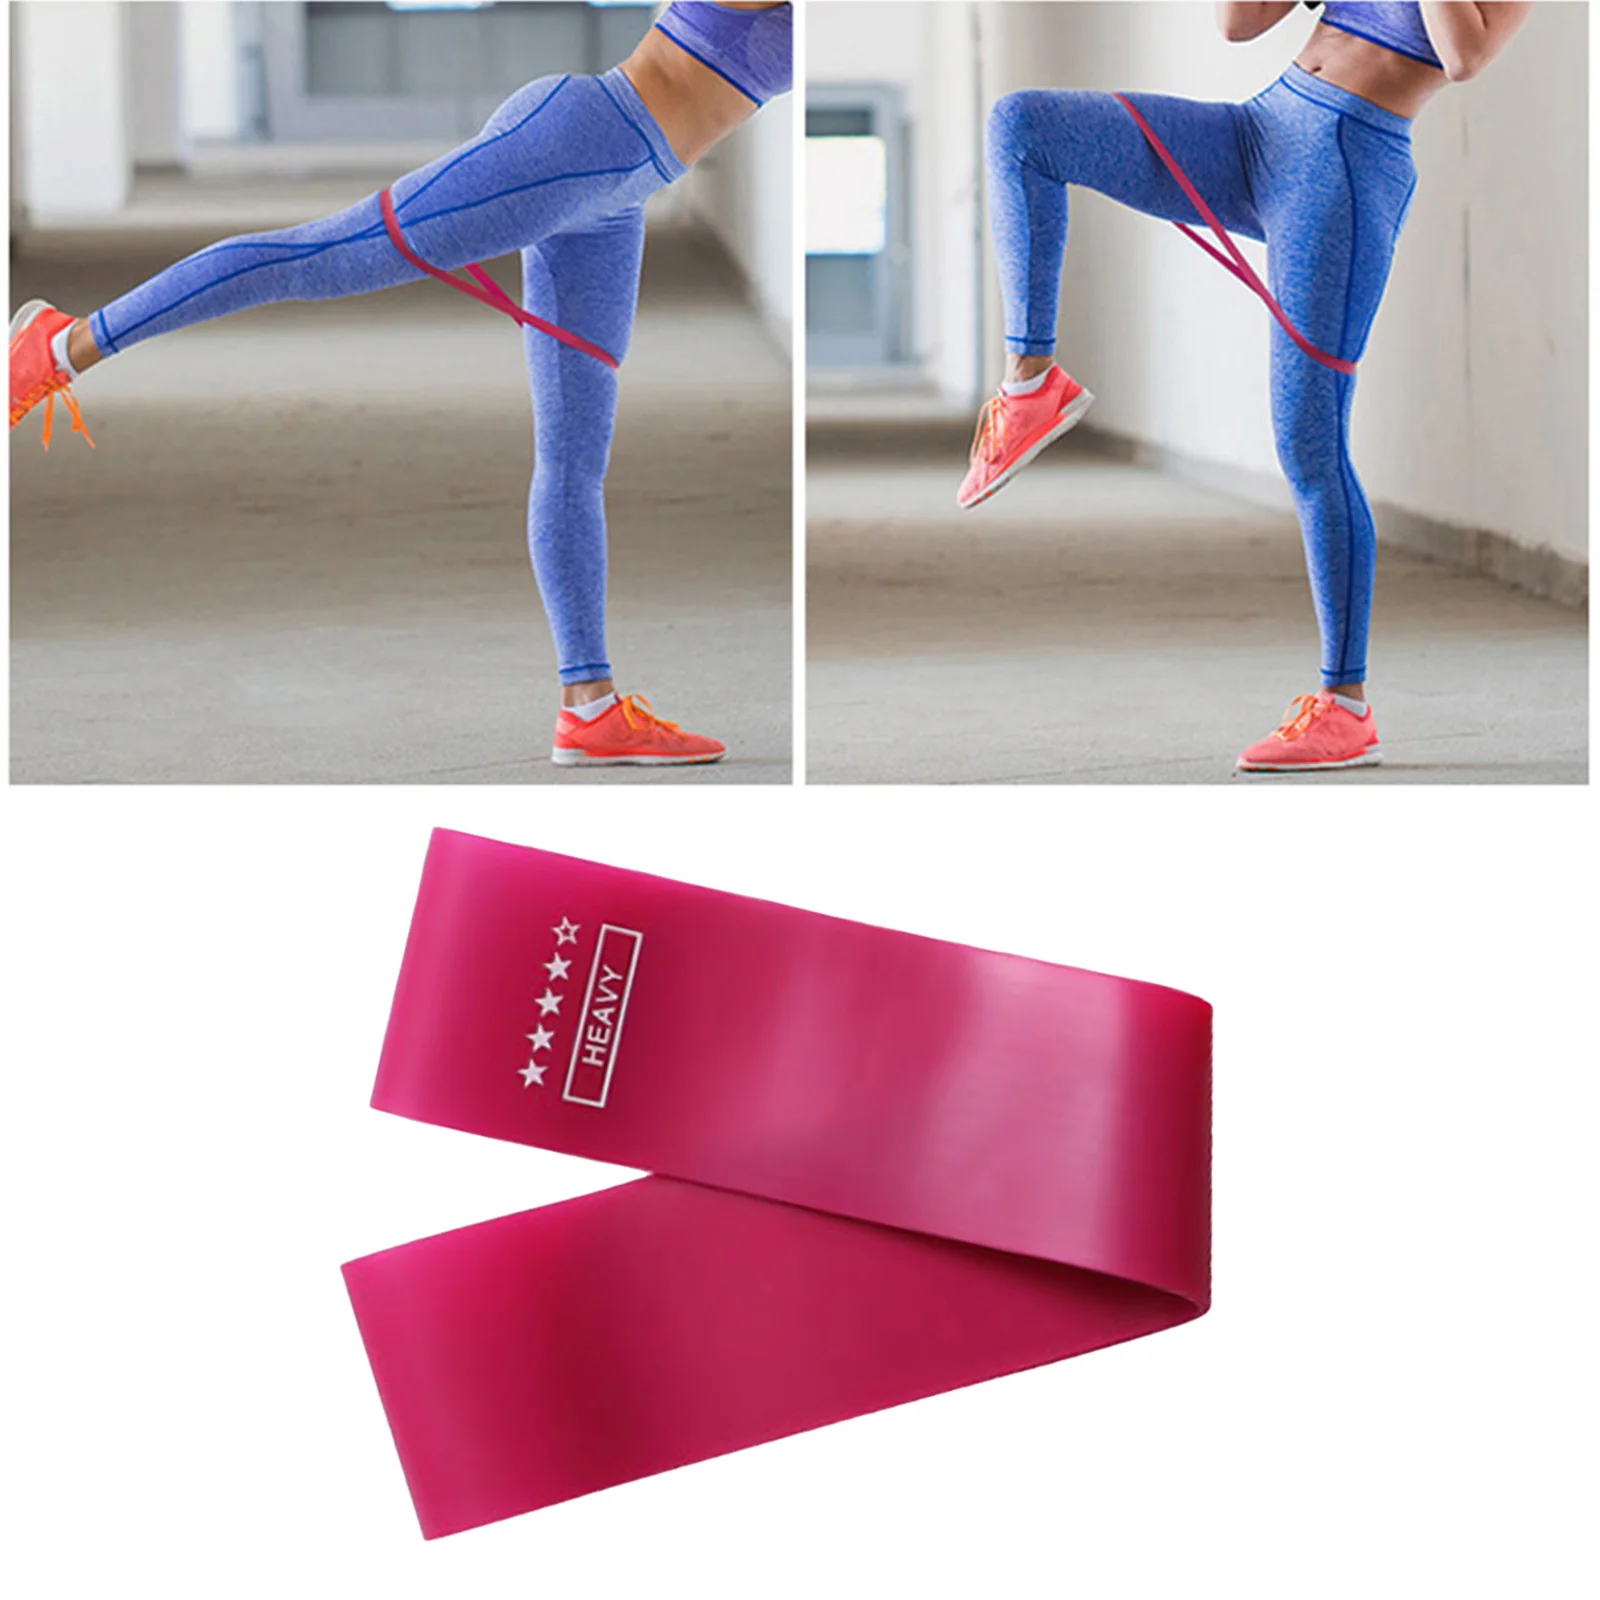 Resistance Band - Best Exercise Band for Women and Men Elastic Workout Band for